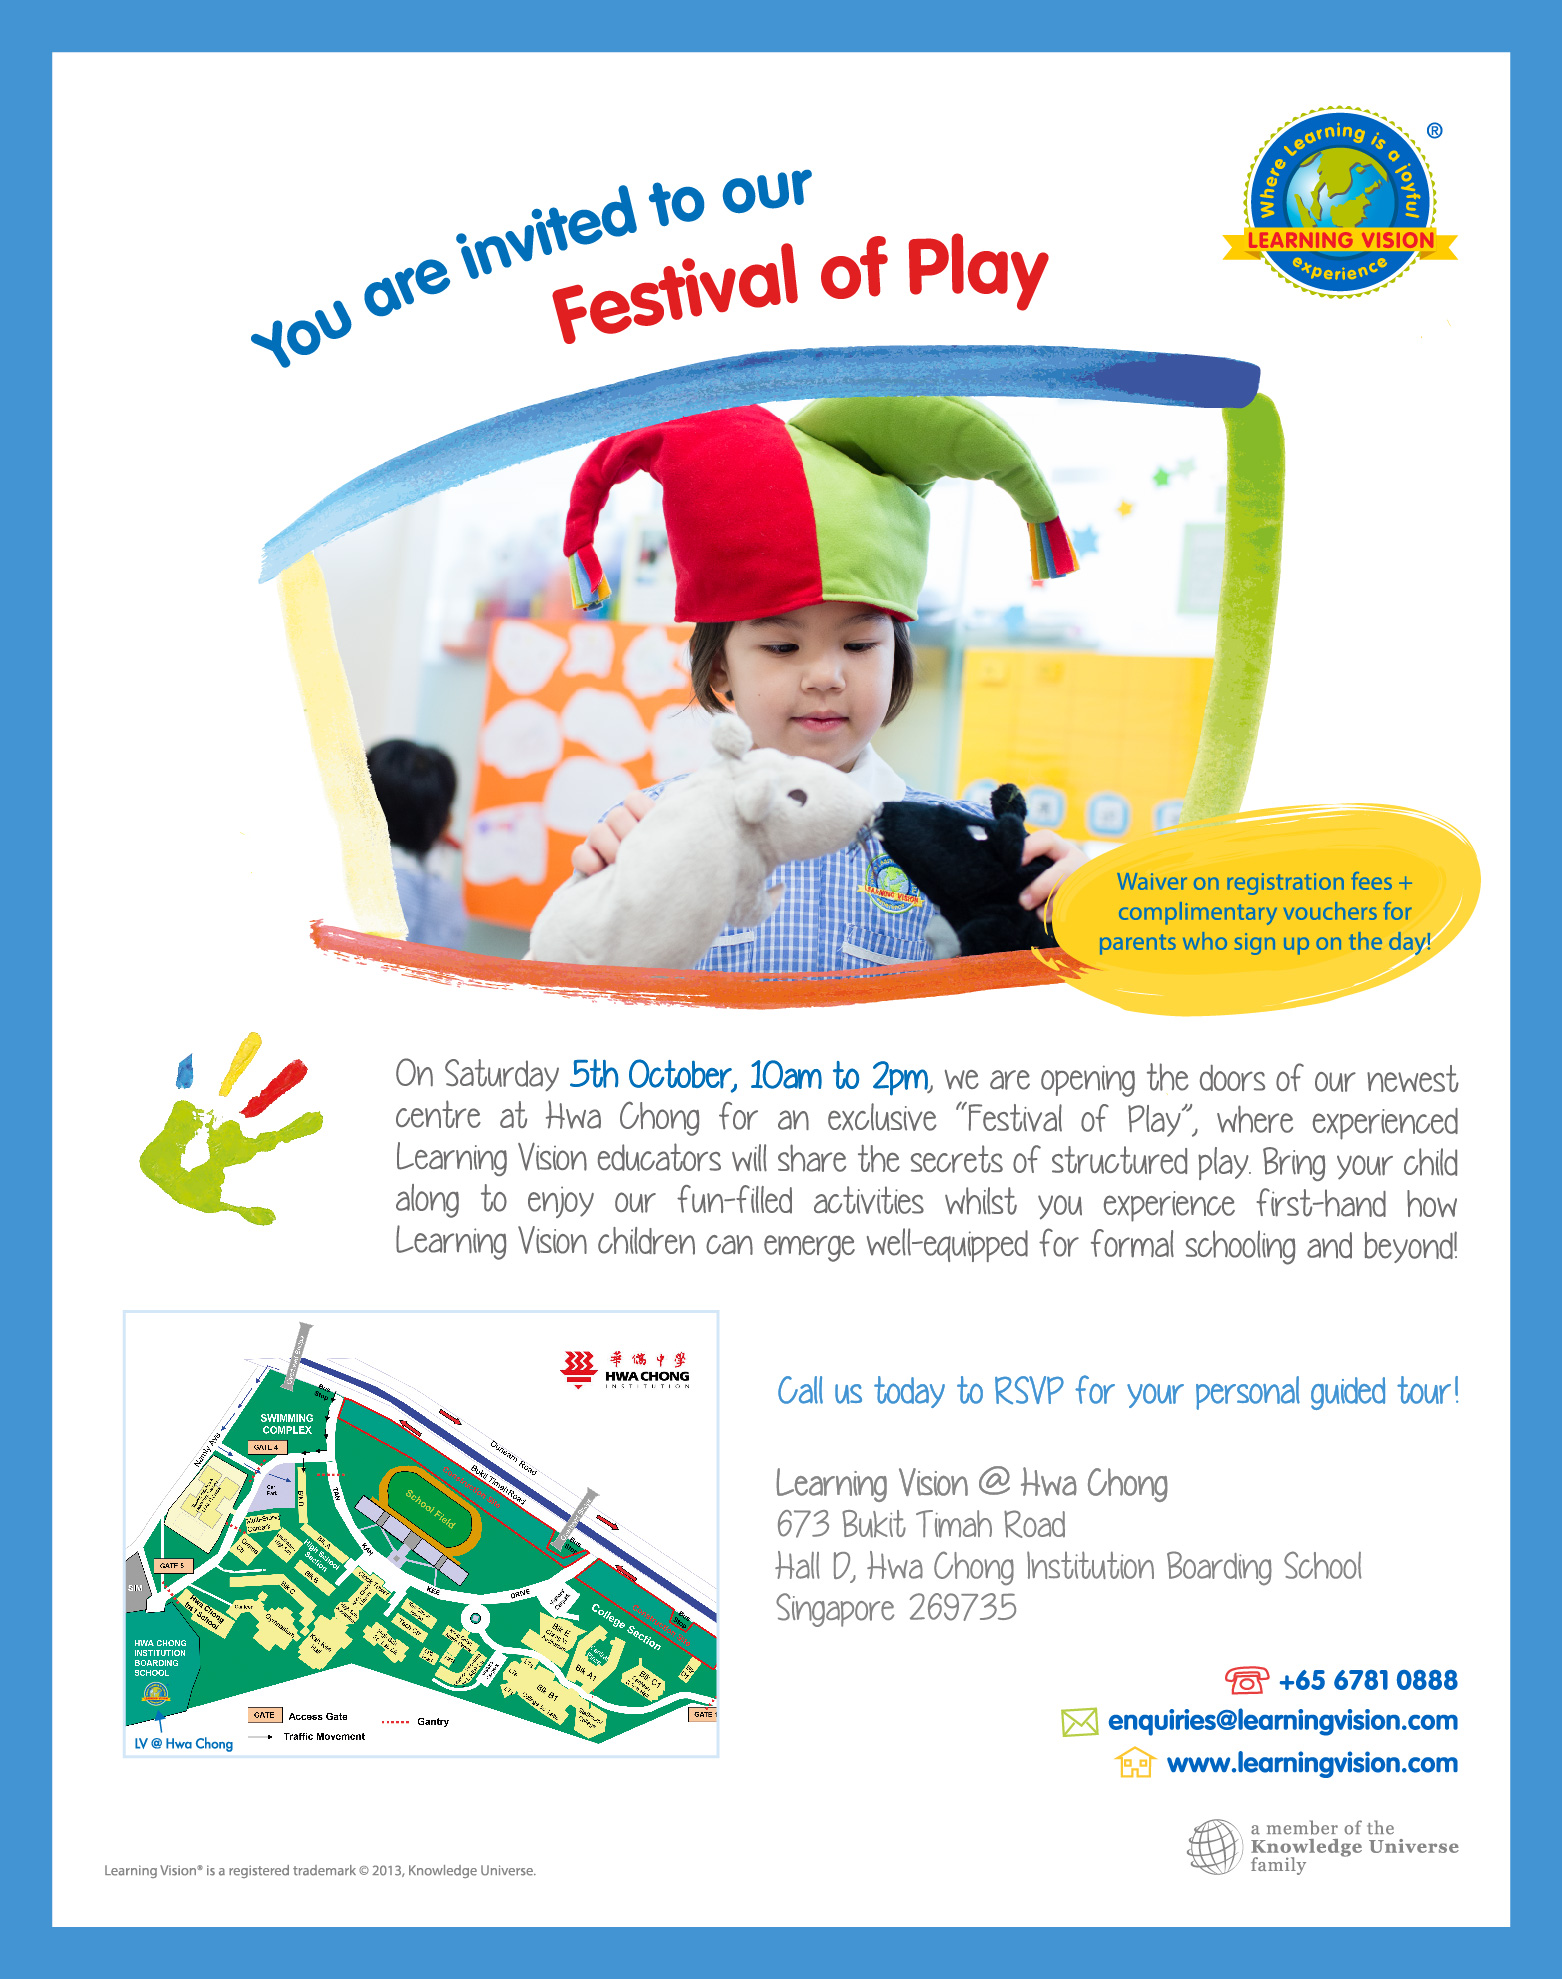 On Saturday 5 Oct 10am to 2pm, we are opening the doors of our newest centre at Hwa Chong for an exclusive 'Festival of Play', where experienced Learning Vision educators will share the secrets of structered play. Bring your child along to enjoy our fun-filled activities whilest you experience first-hand how Learning Vision children can emerged well-equipped for formal schooling and beyond! Call us today to RSVP for your personal guided tour! Call us at 6781 0888 or email us at enquiries@learningvision.com. Visit our website at www.learningvision.com